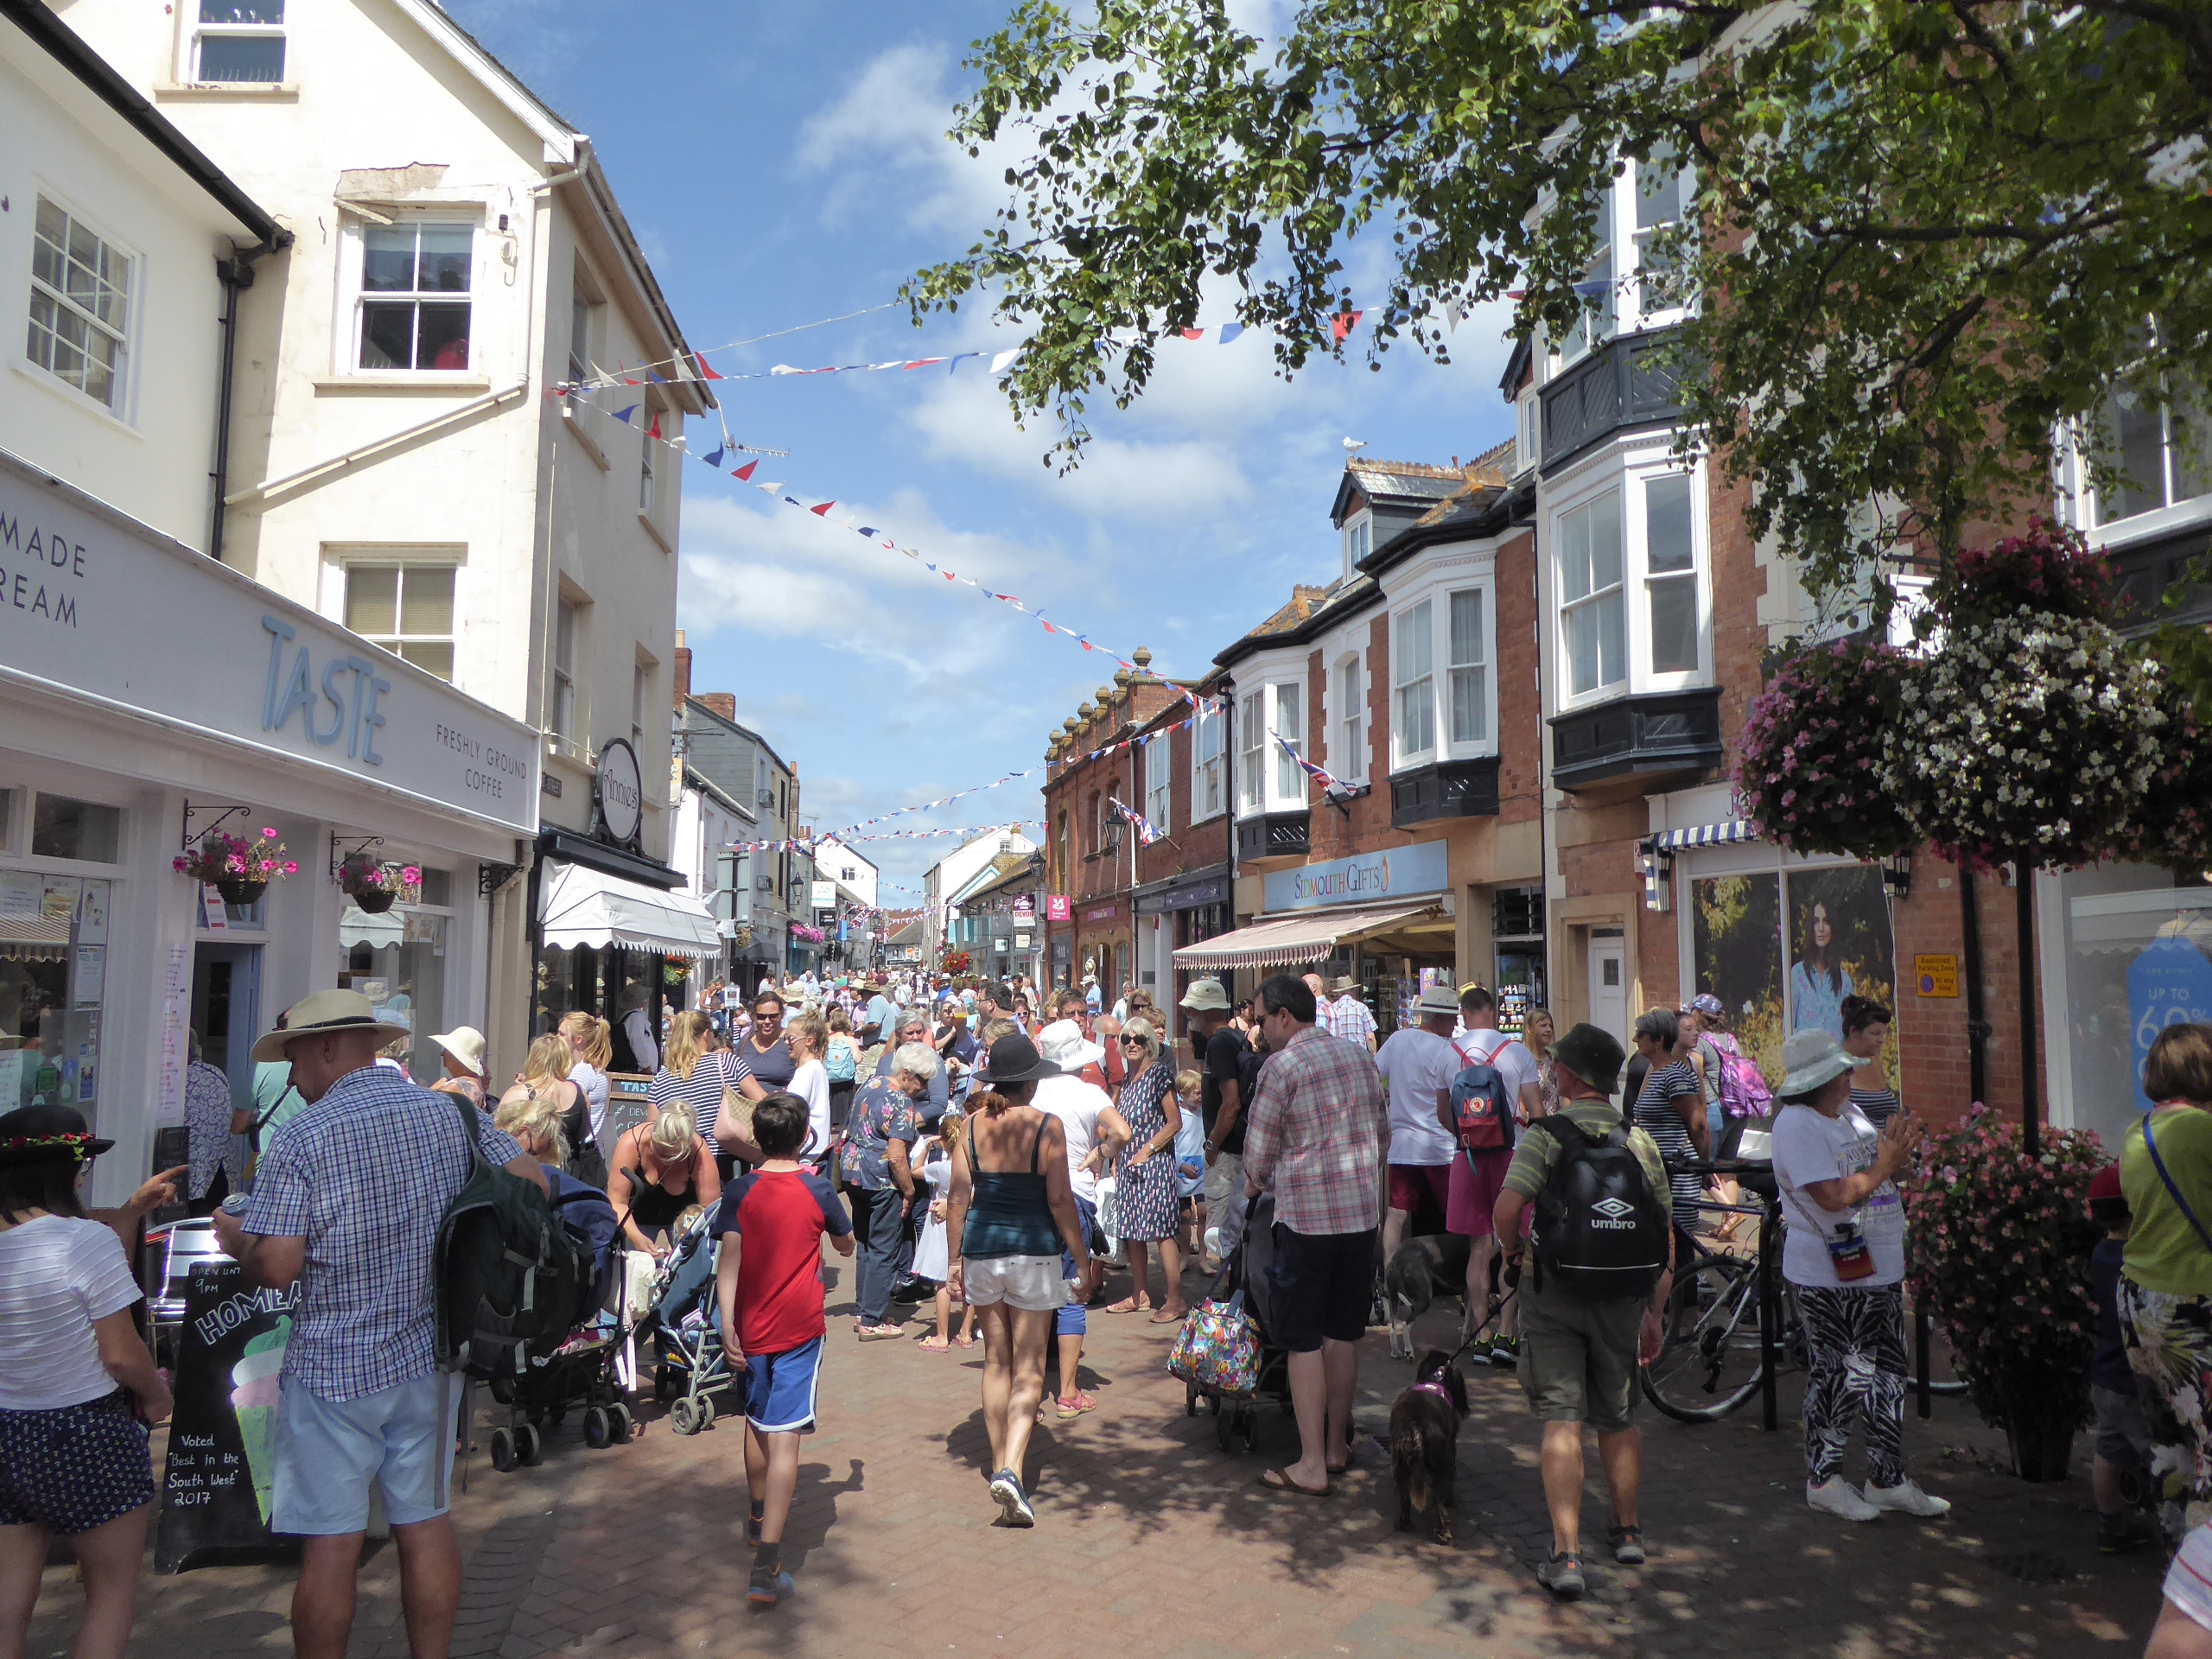 Image of Sidmouth town centre